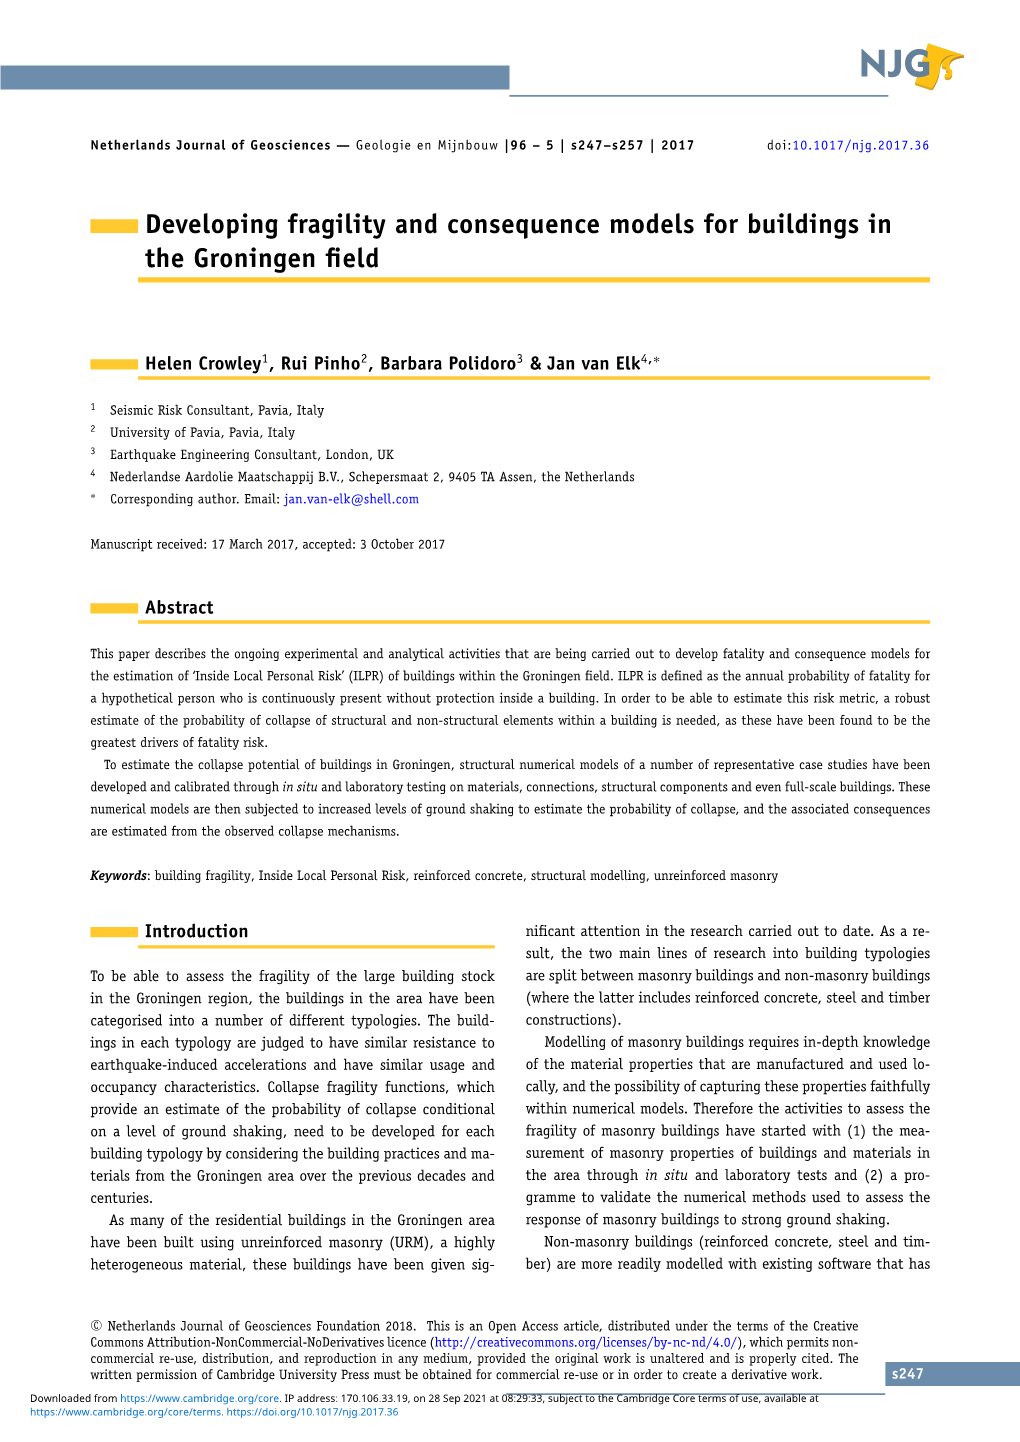 Developing Fragility and Consequence Models for Buildings in the Groningen Field